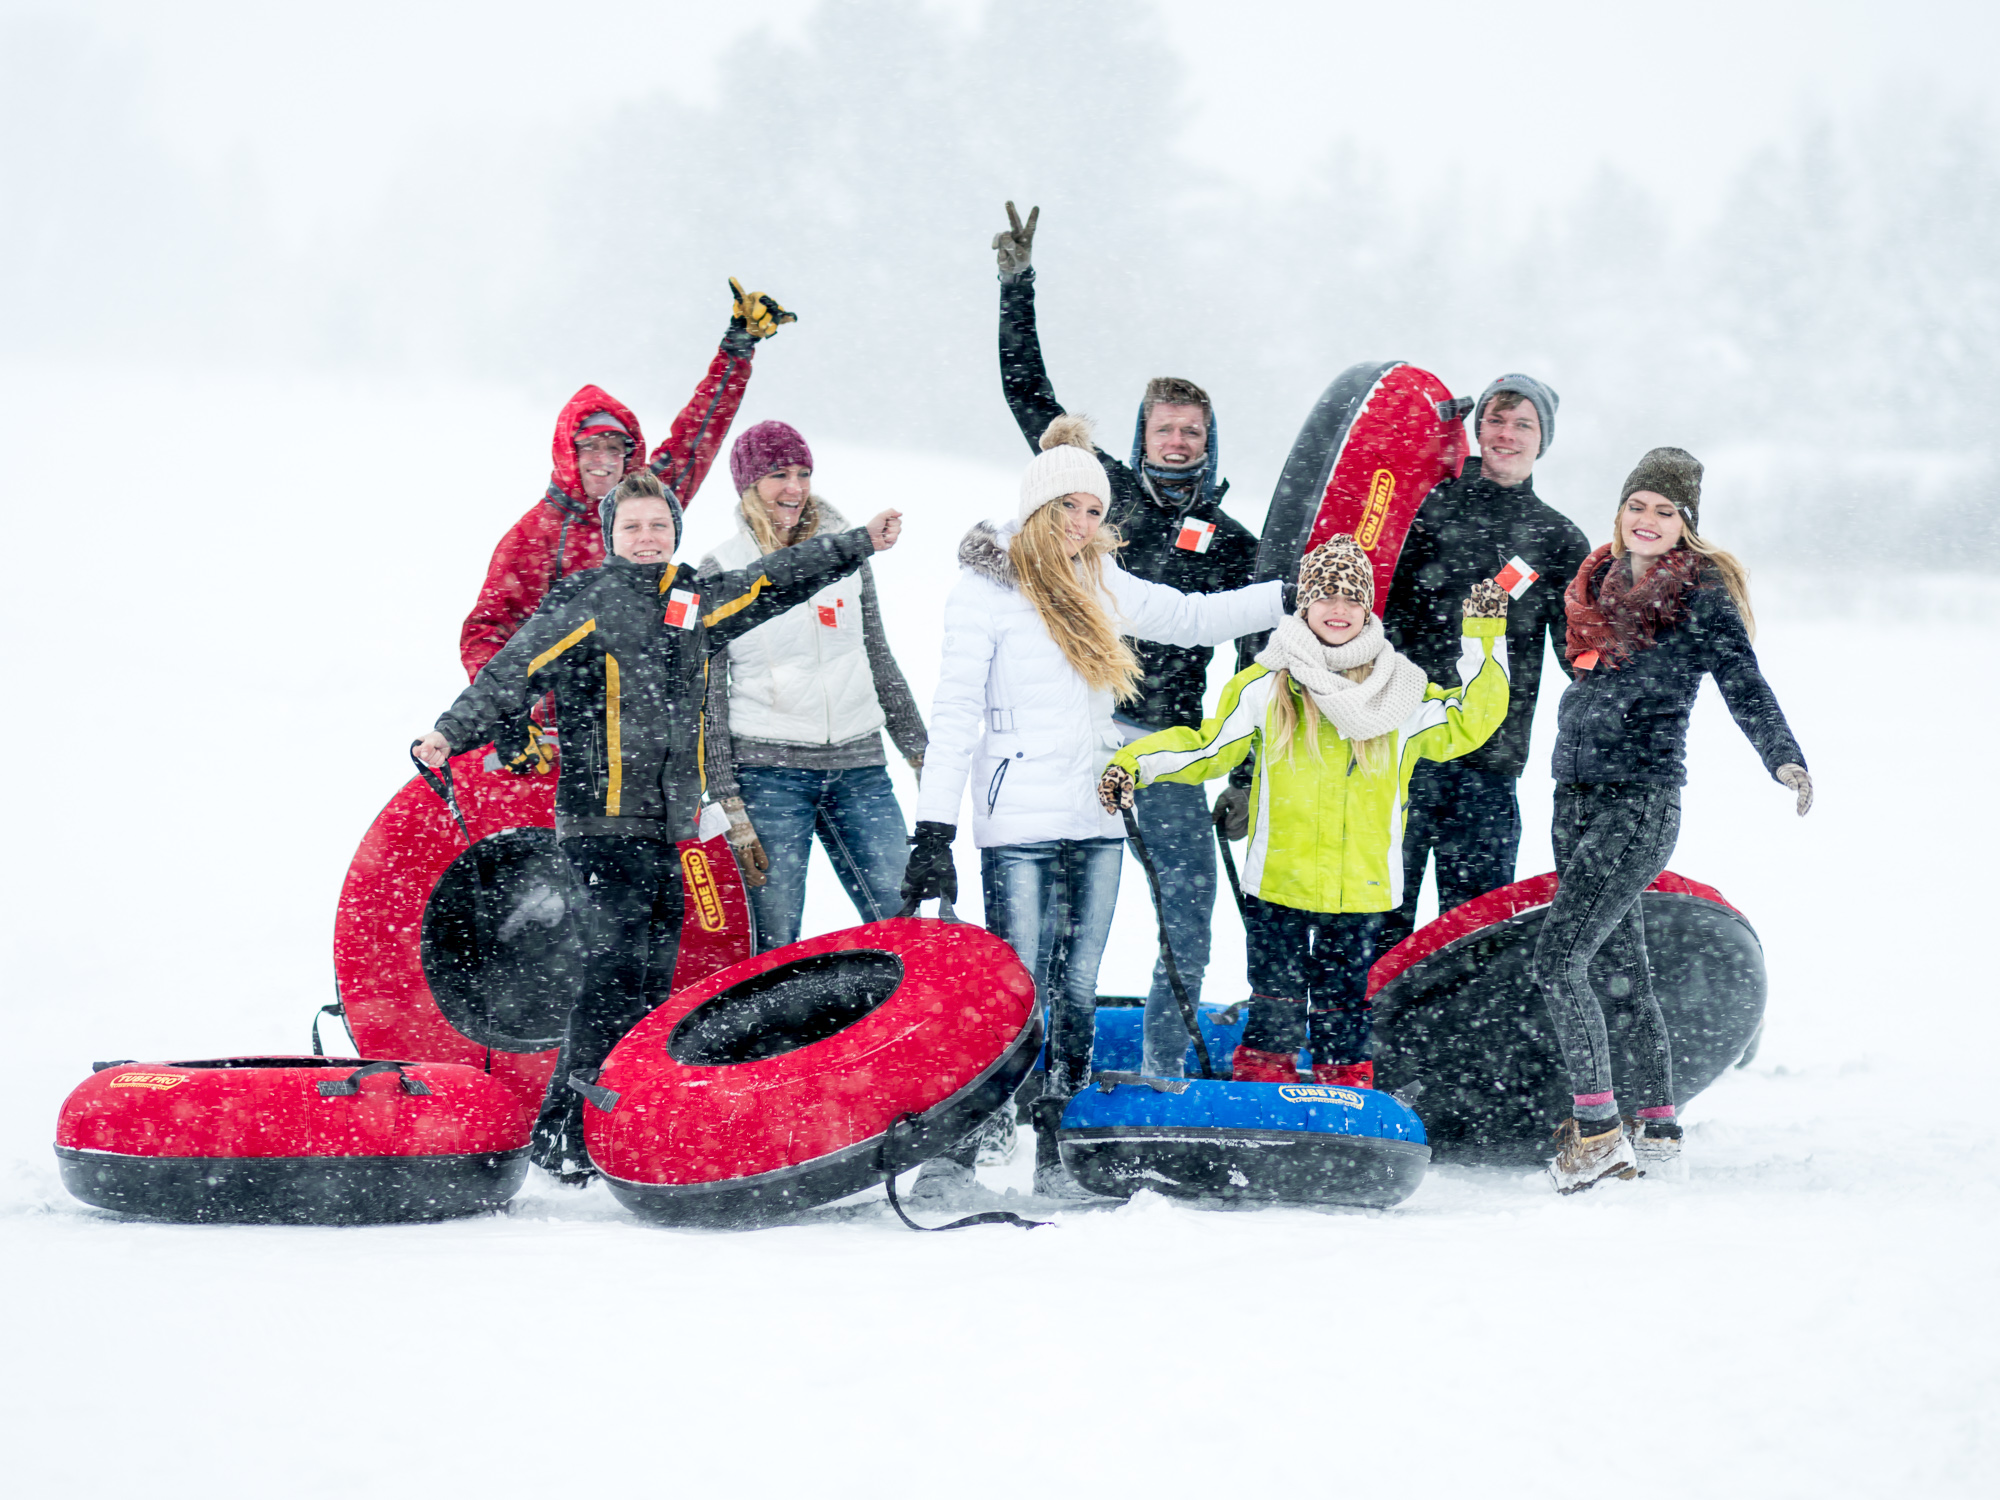 Tubing in the snow at The Activity Barn, McCall, Idaho.